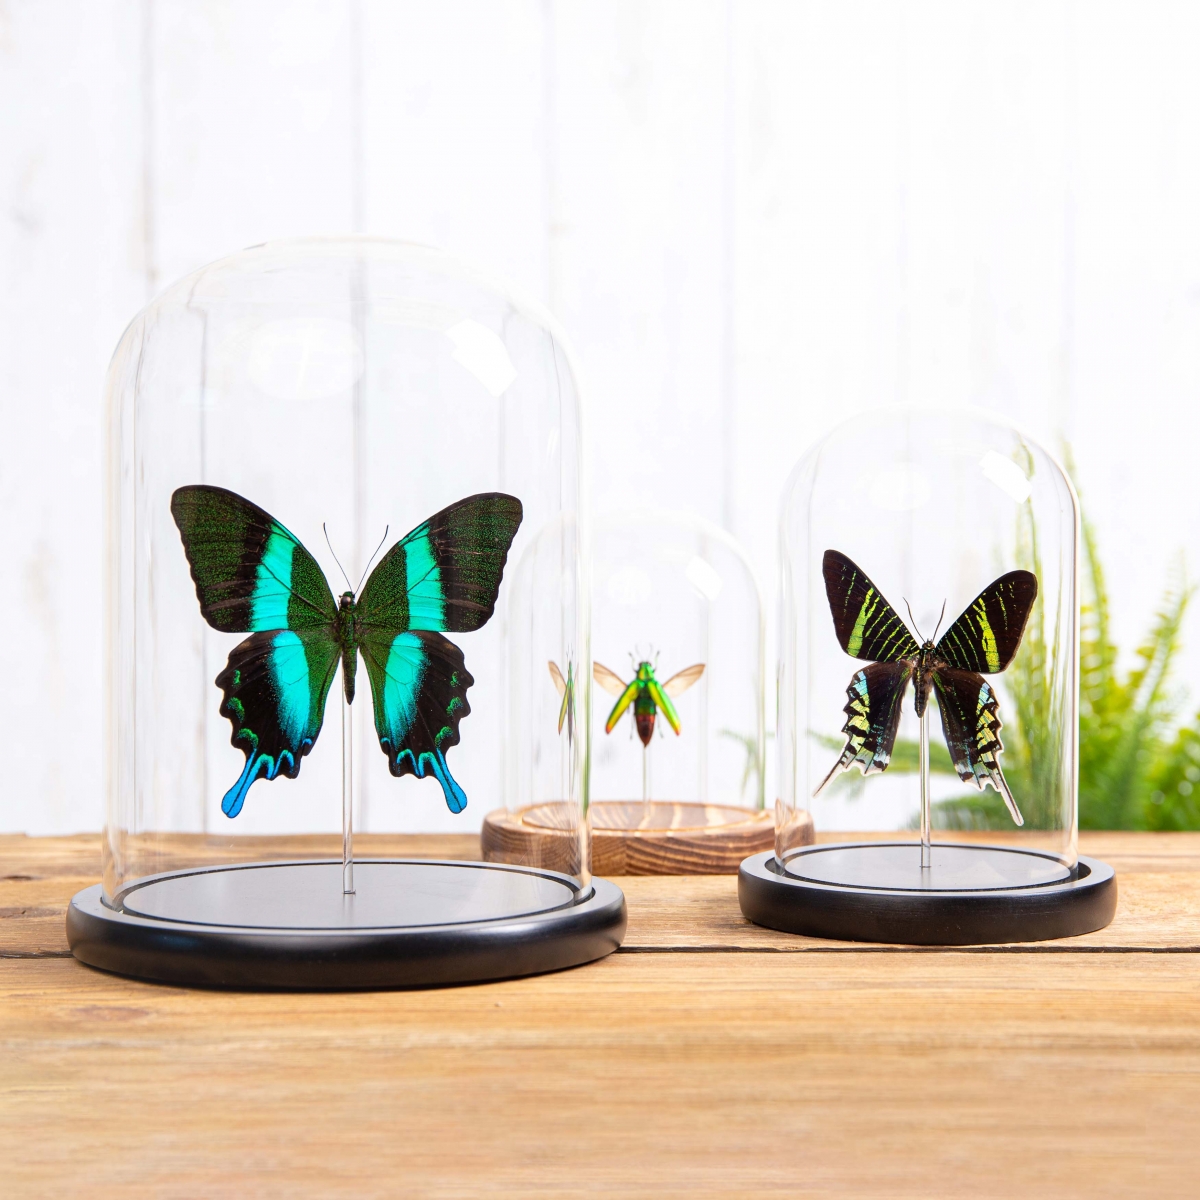 Androgeus Swallowtail Butterfly in Glass Dome with Wooden Base (Papilio androgeus epidauras)